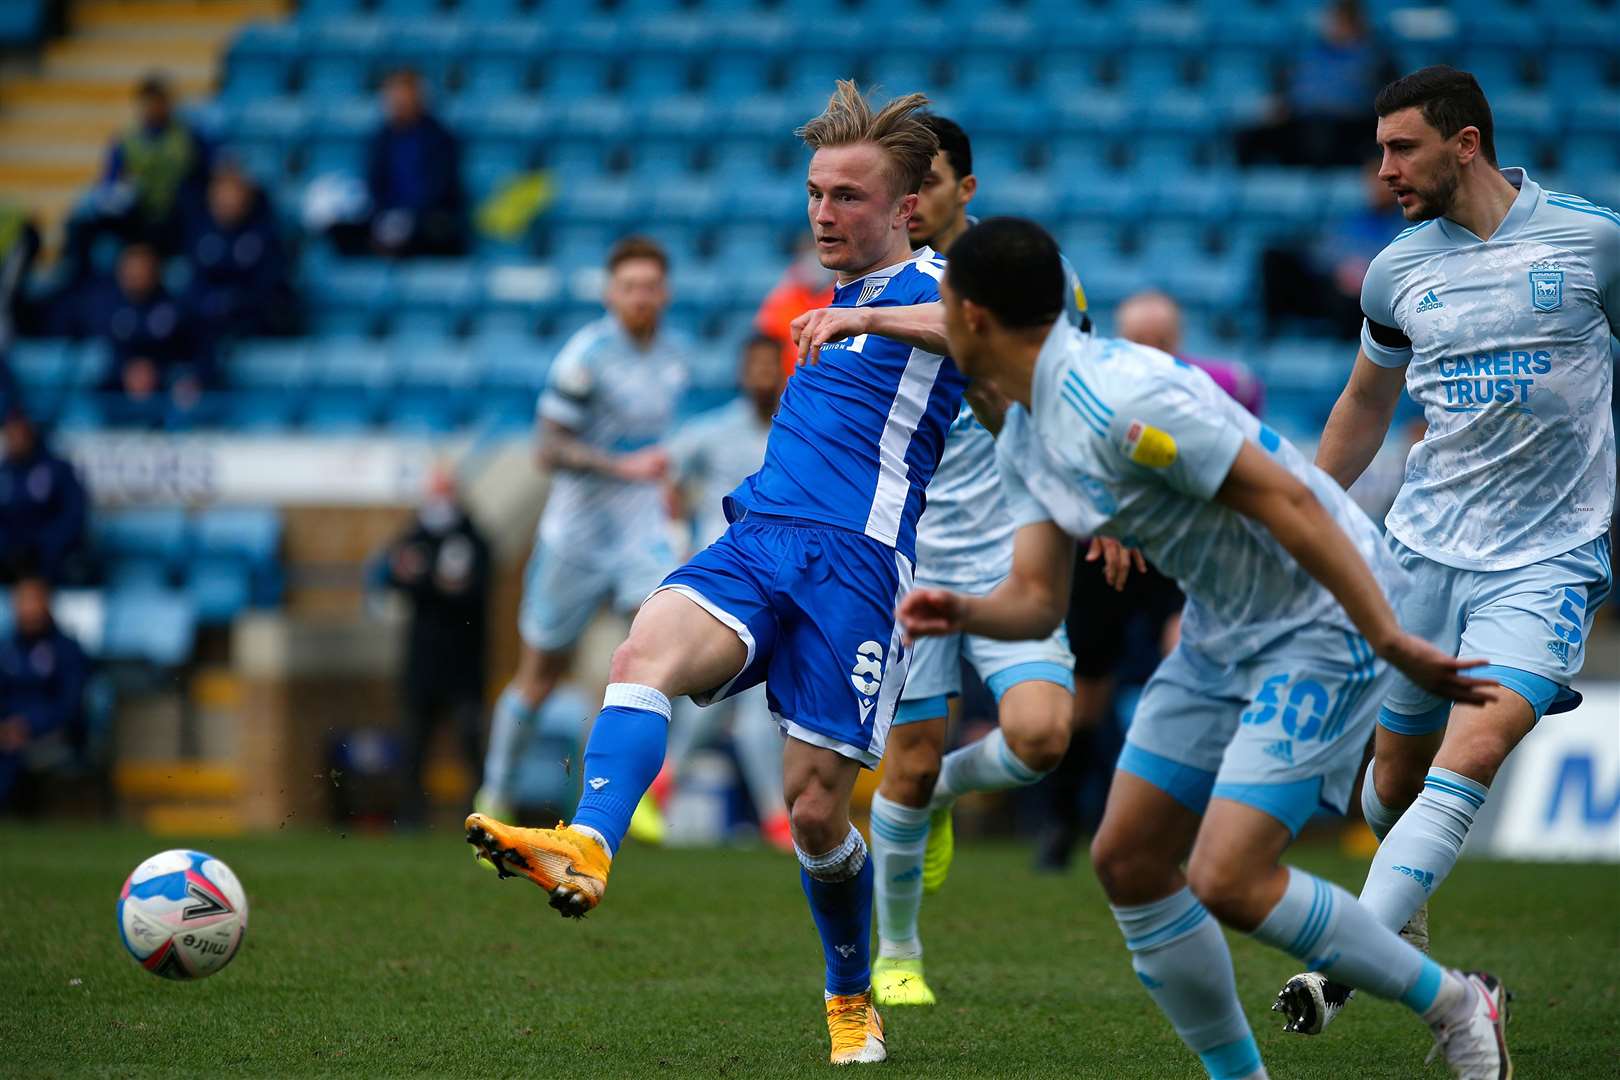 Gills skipper Kyle Dempsey spreads the play against Ipswich. Picture: Andy Jones